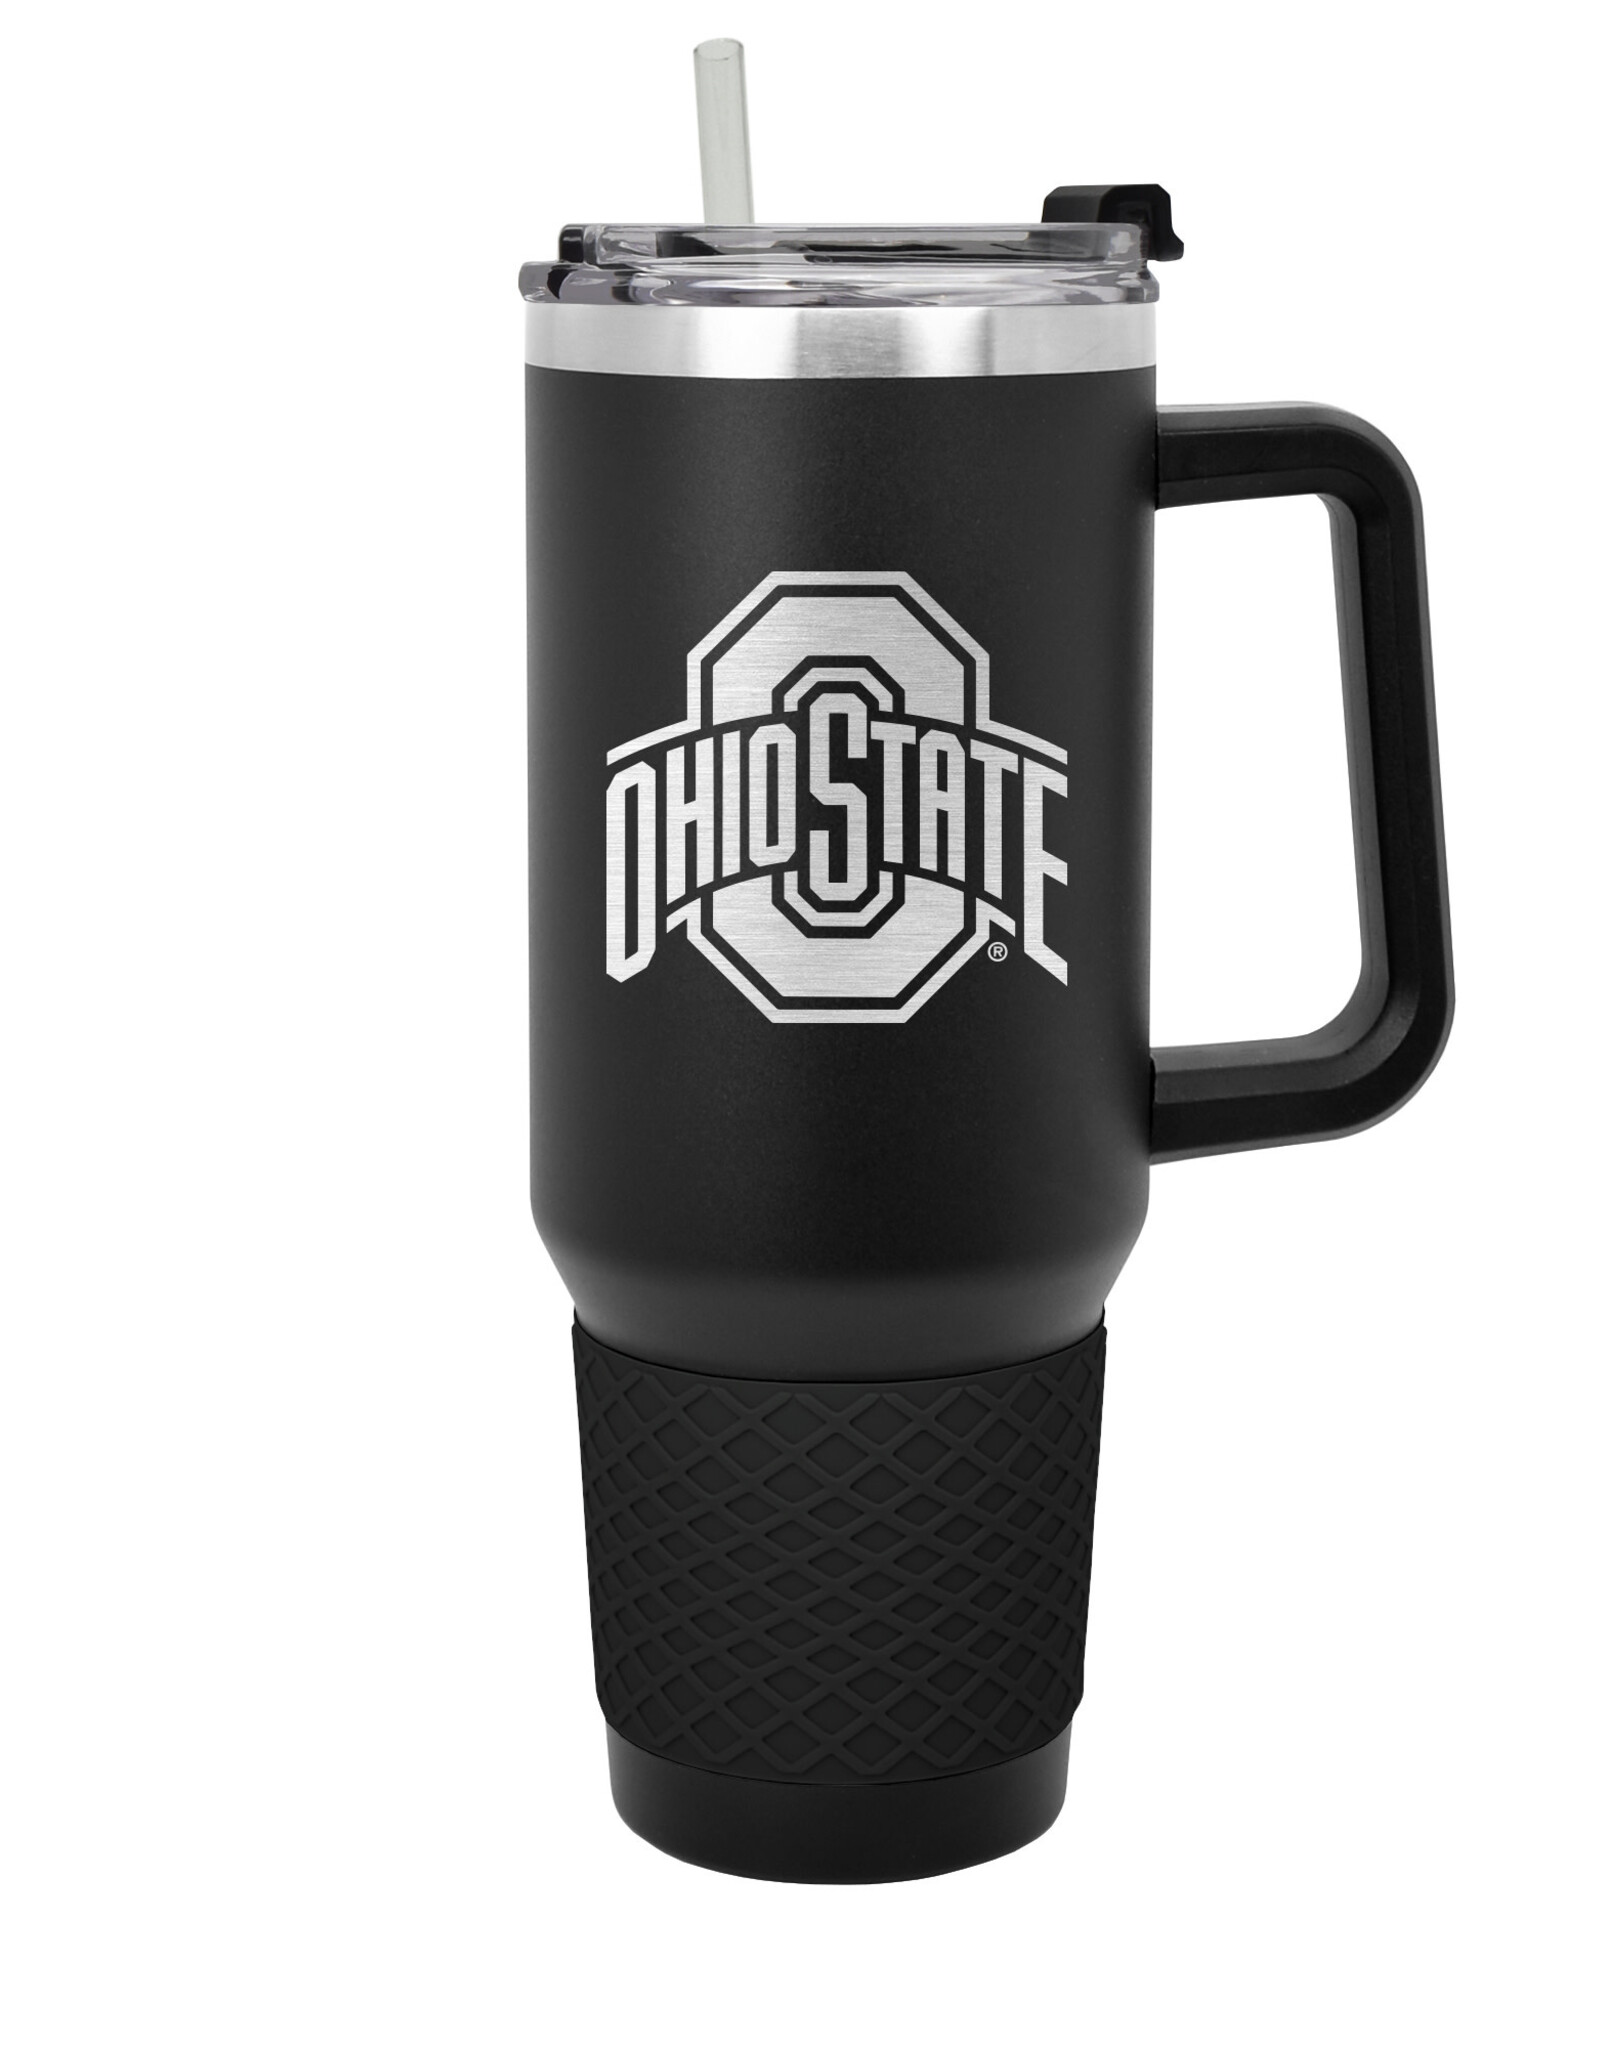 Great American Products Ohio State Buckeyes 40oz Stealth Travel Tumbler - Black